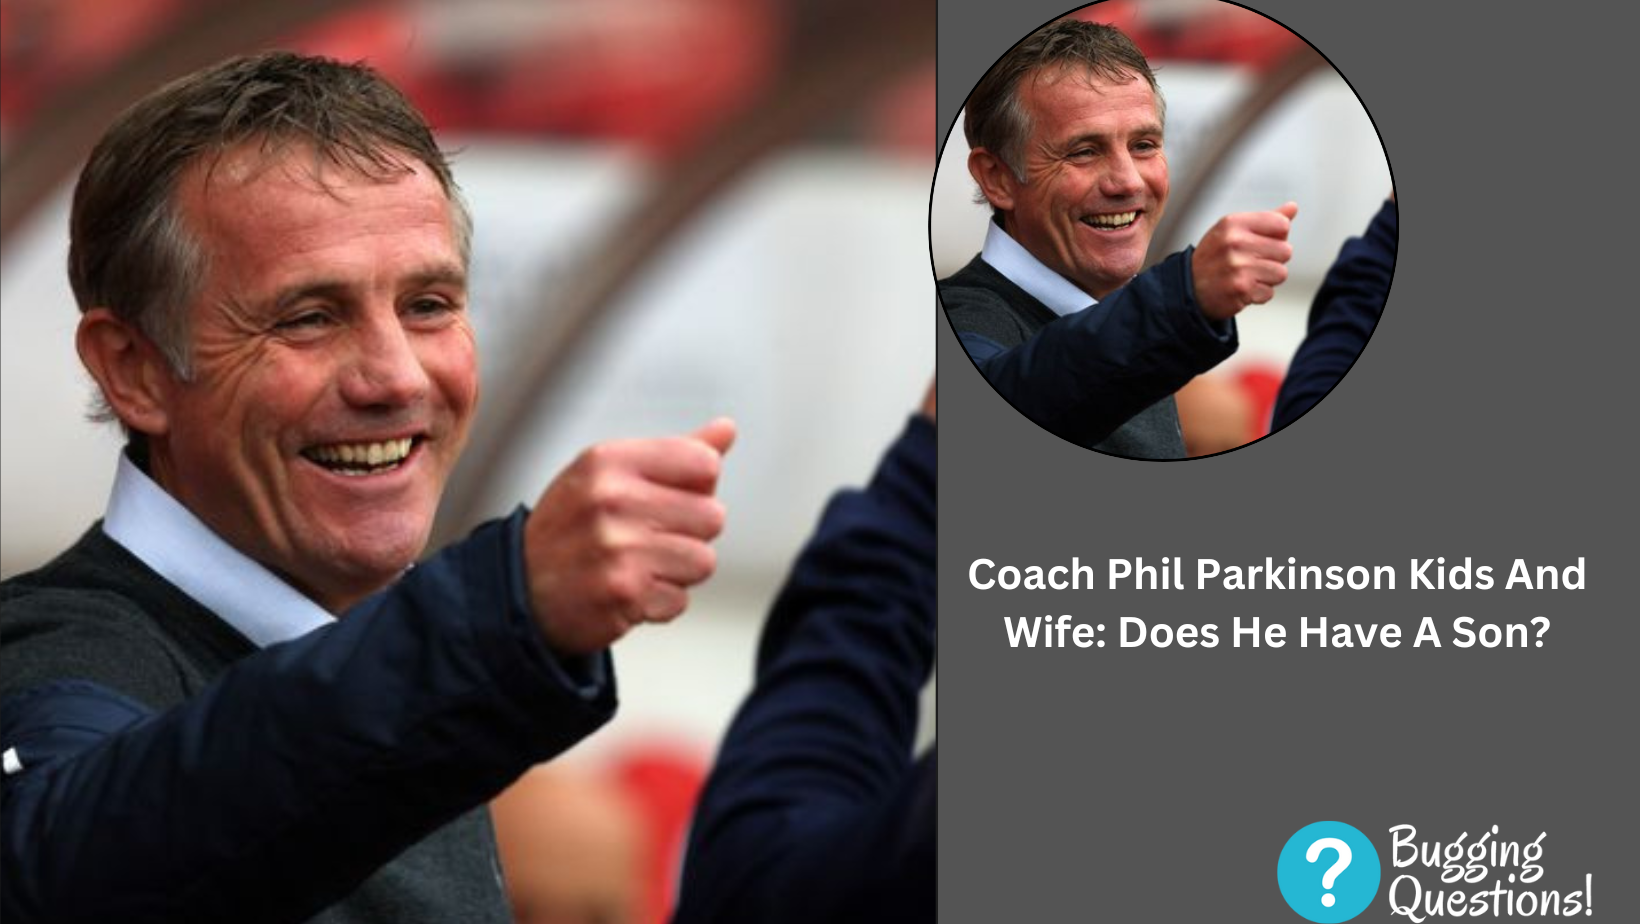 Coach Phil Parkinson Kids And Wife: Does He Have A Son?